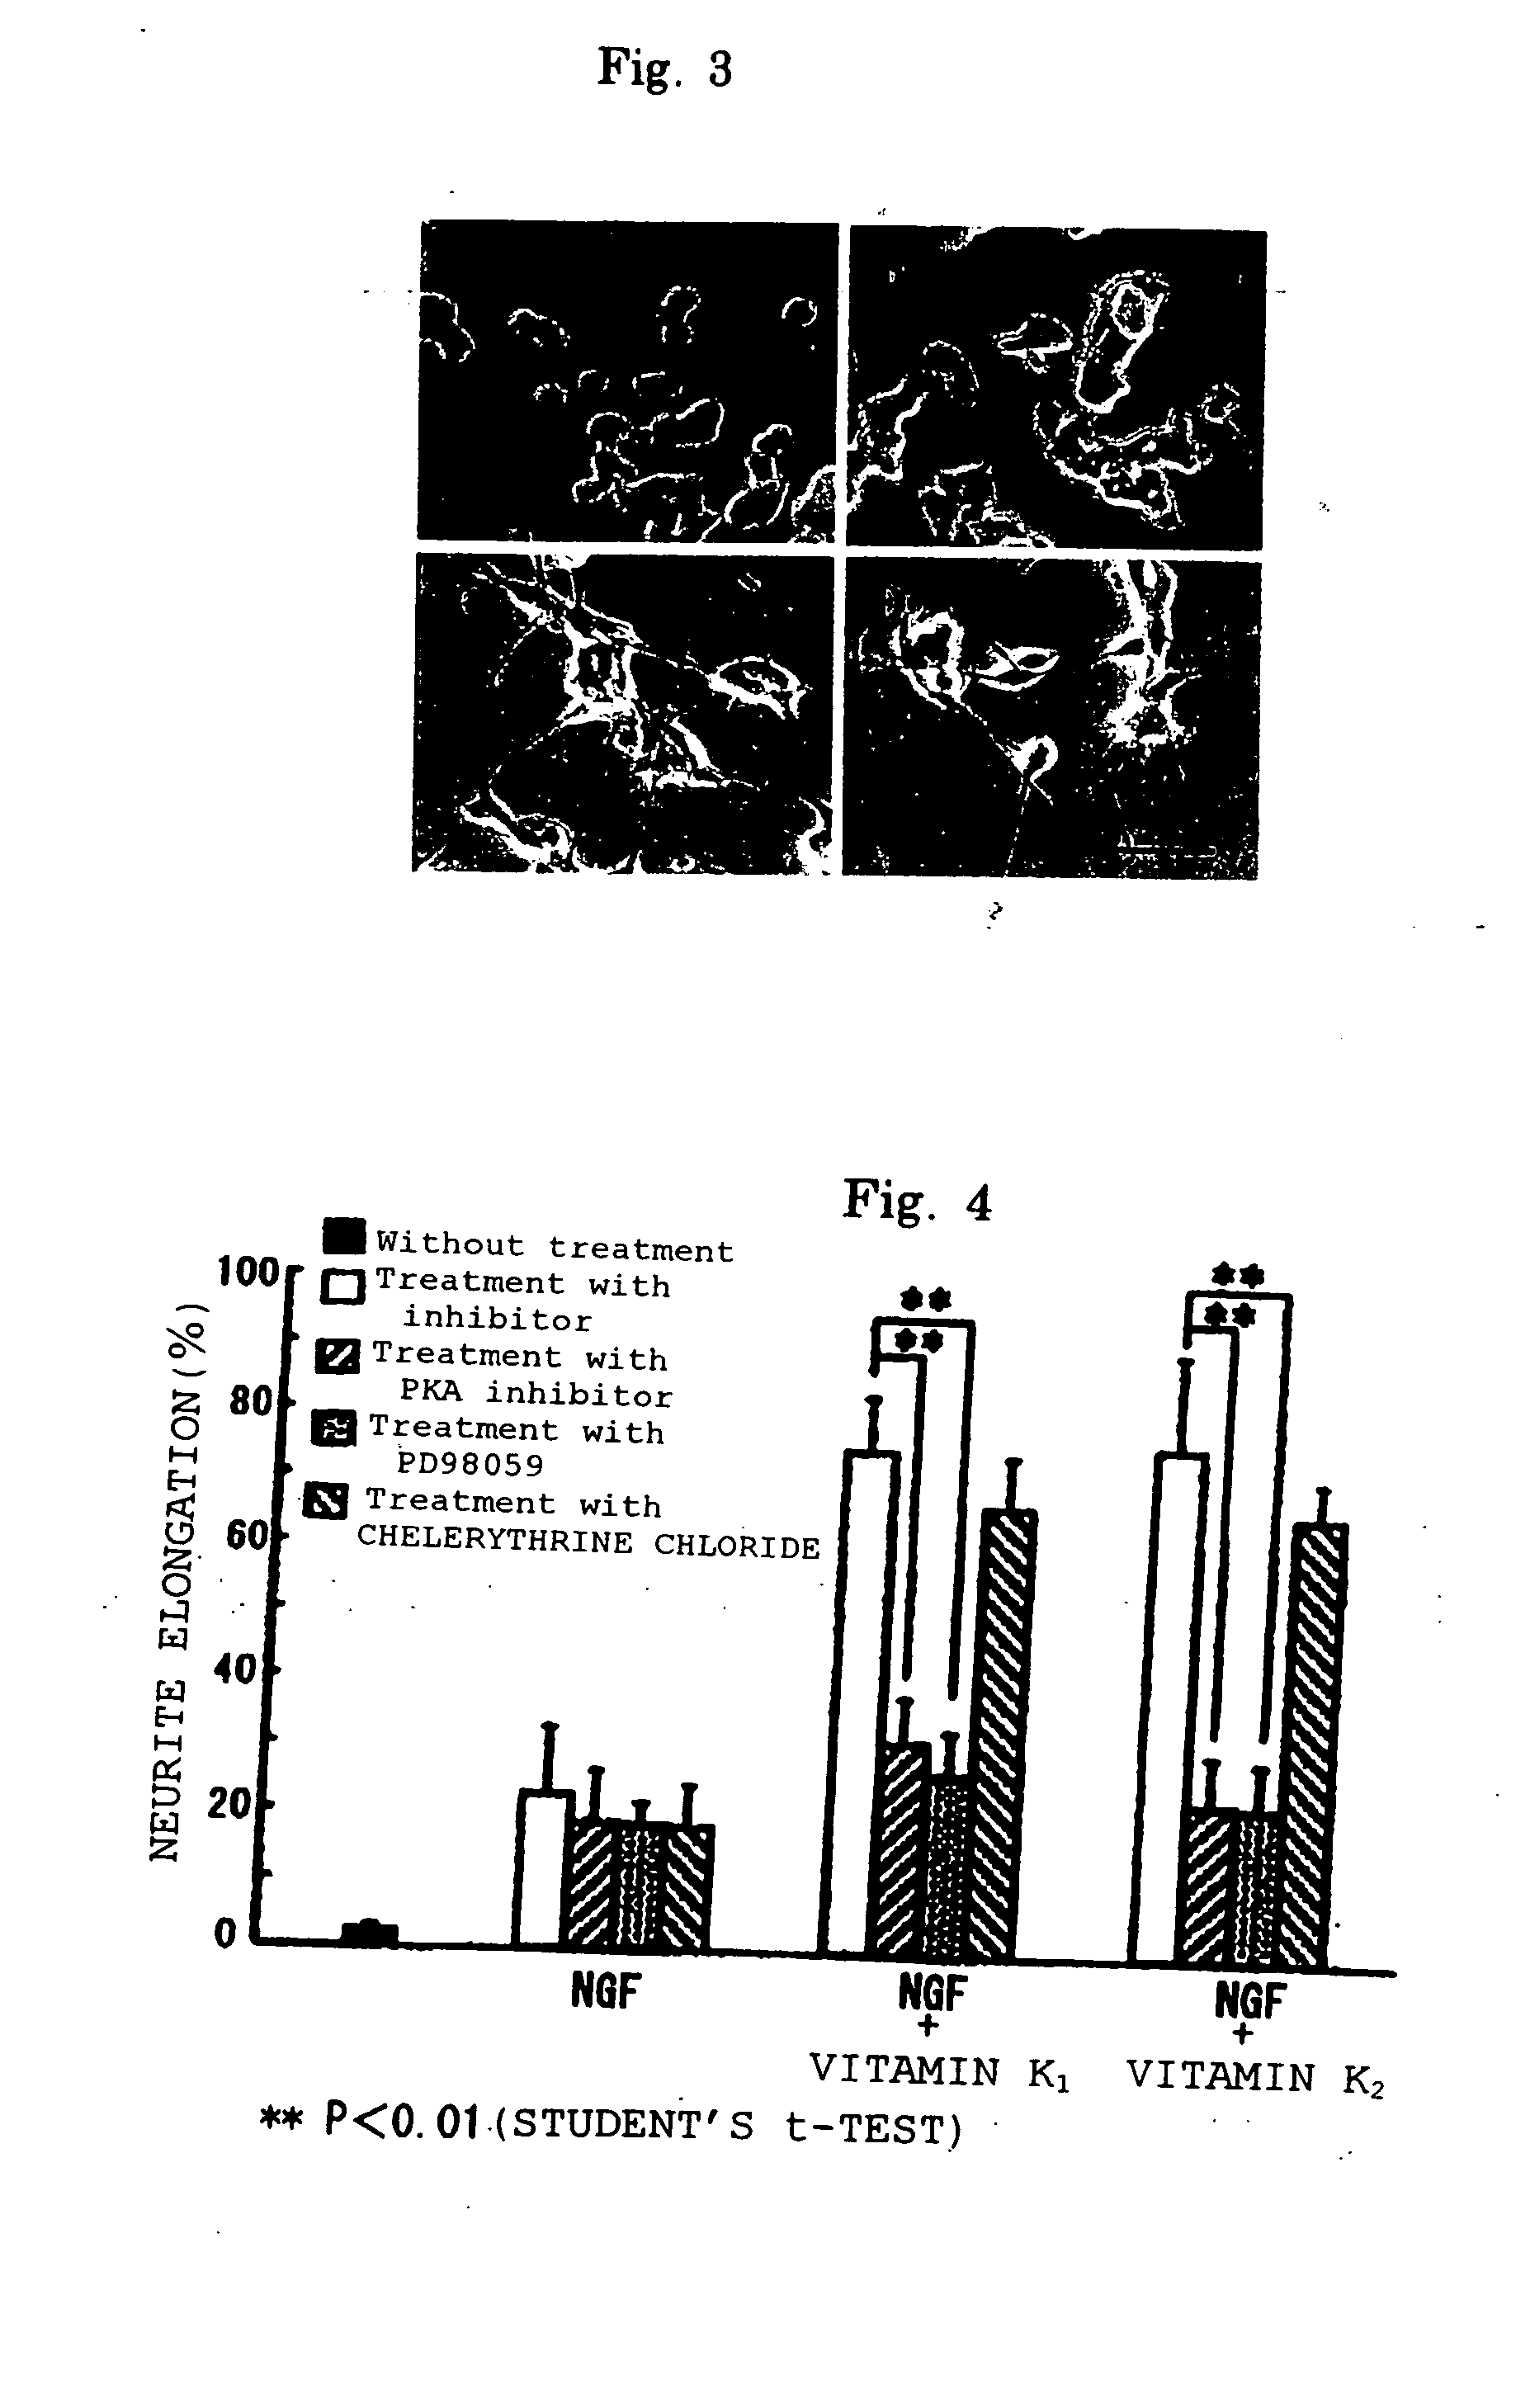 Medicinal compositions containing vitamin k's as nerve growth factor potentiator and utilization thereof